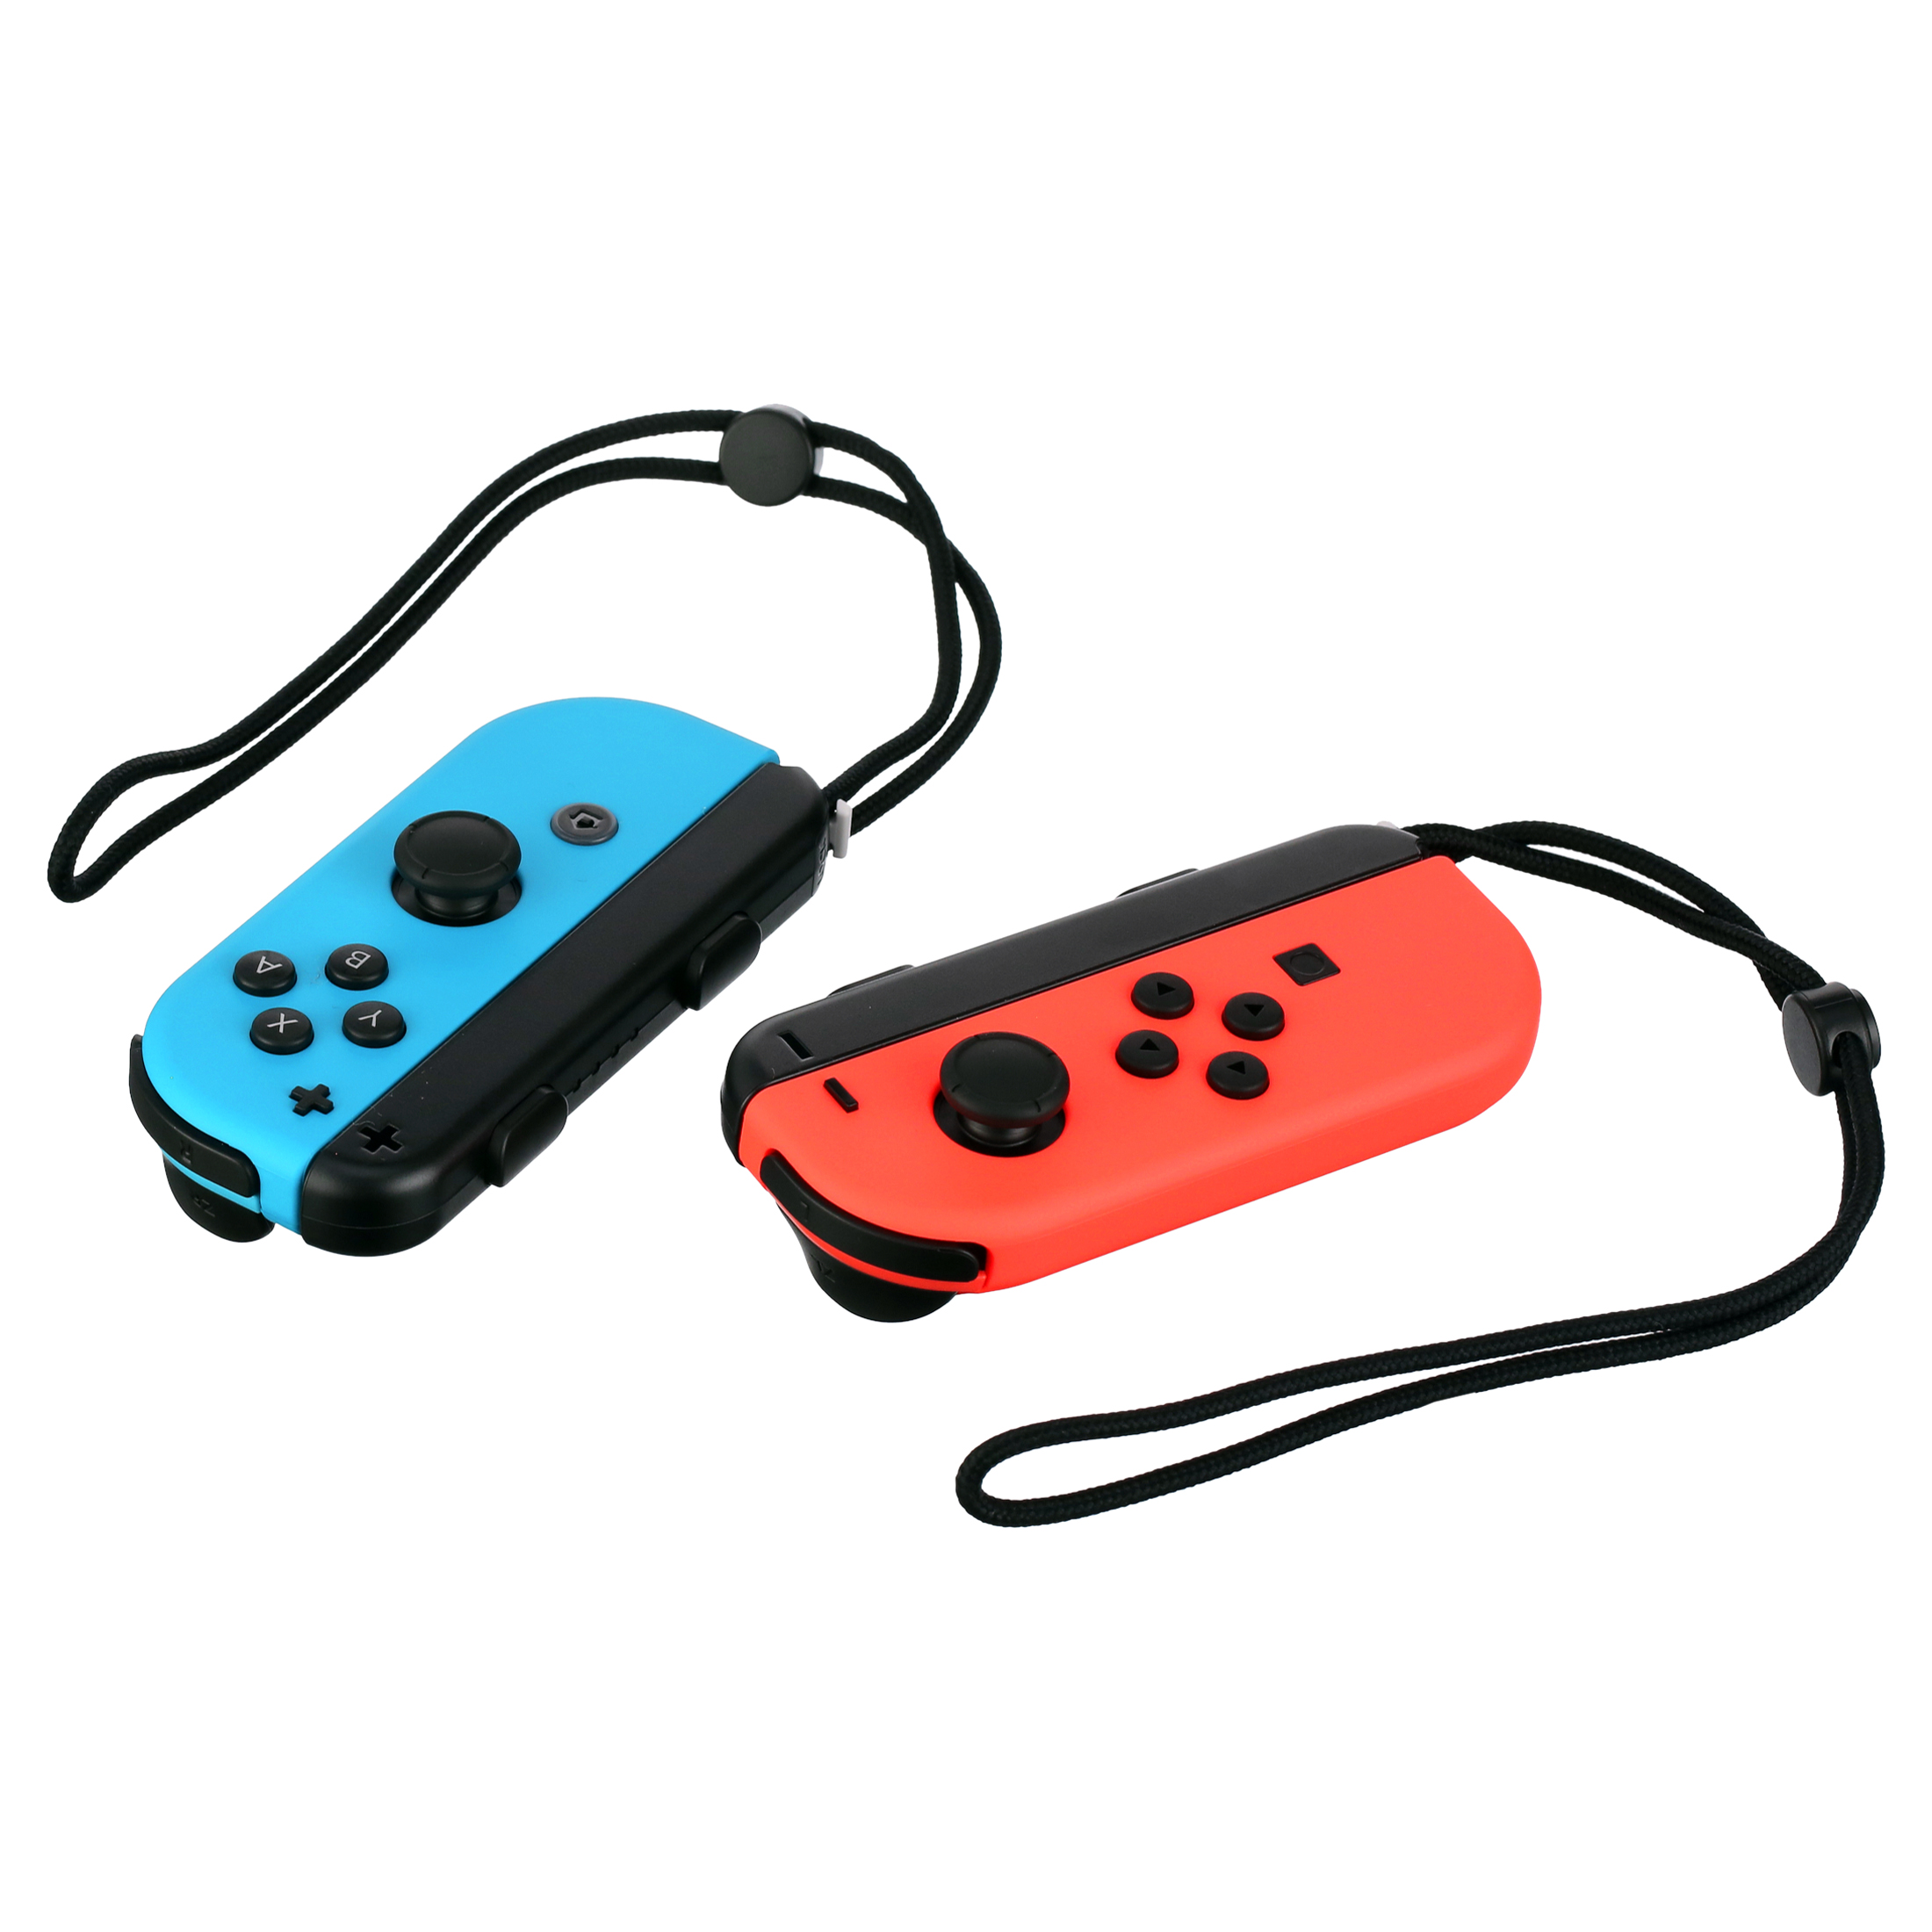 Nintendo Switch - Joy-Con (L/R) - Left Neon Red/ Right Neon Blue Controllers - image 1 of 6